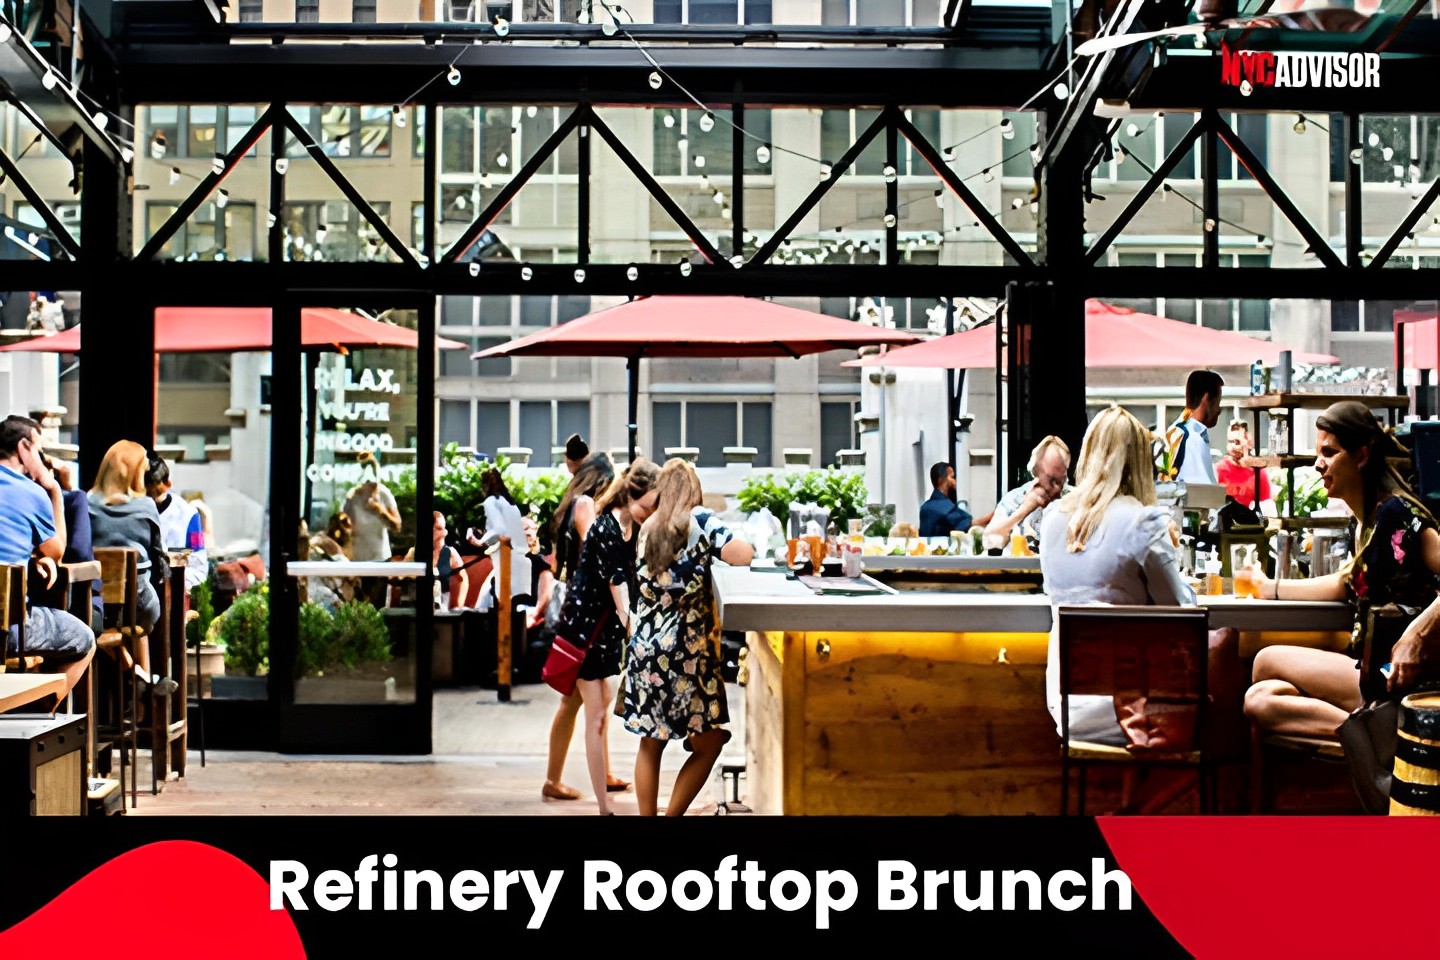 The Refinery Rooftop Brunch in NYC